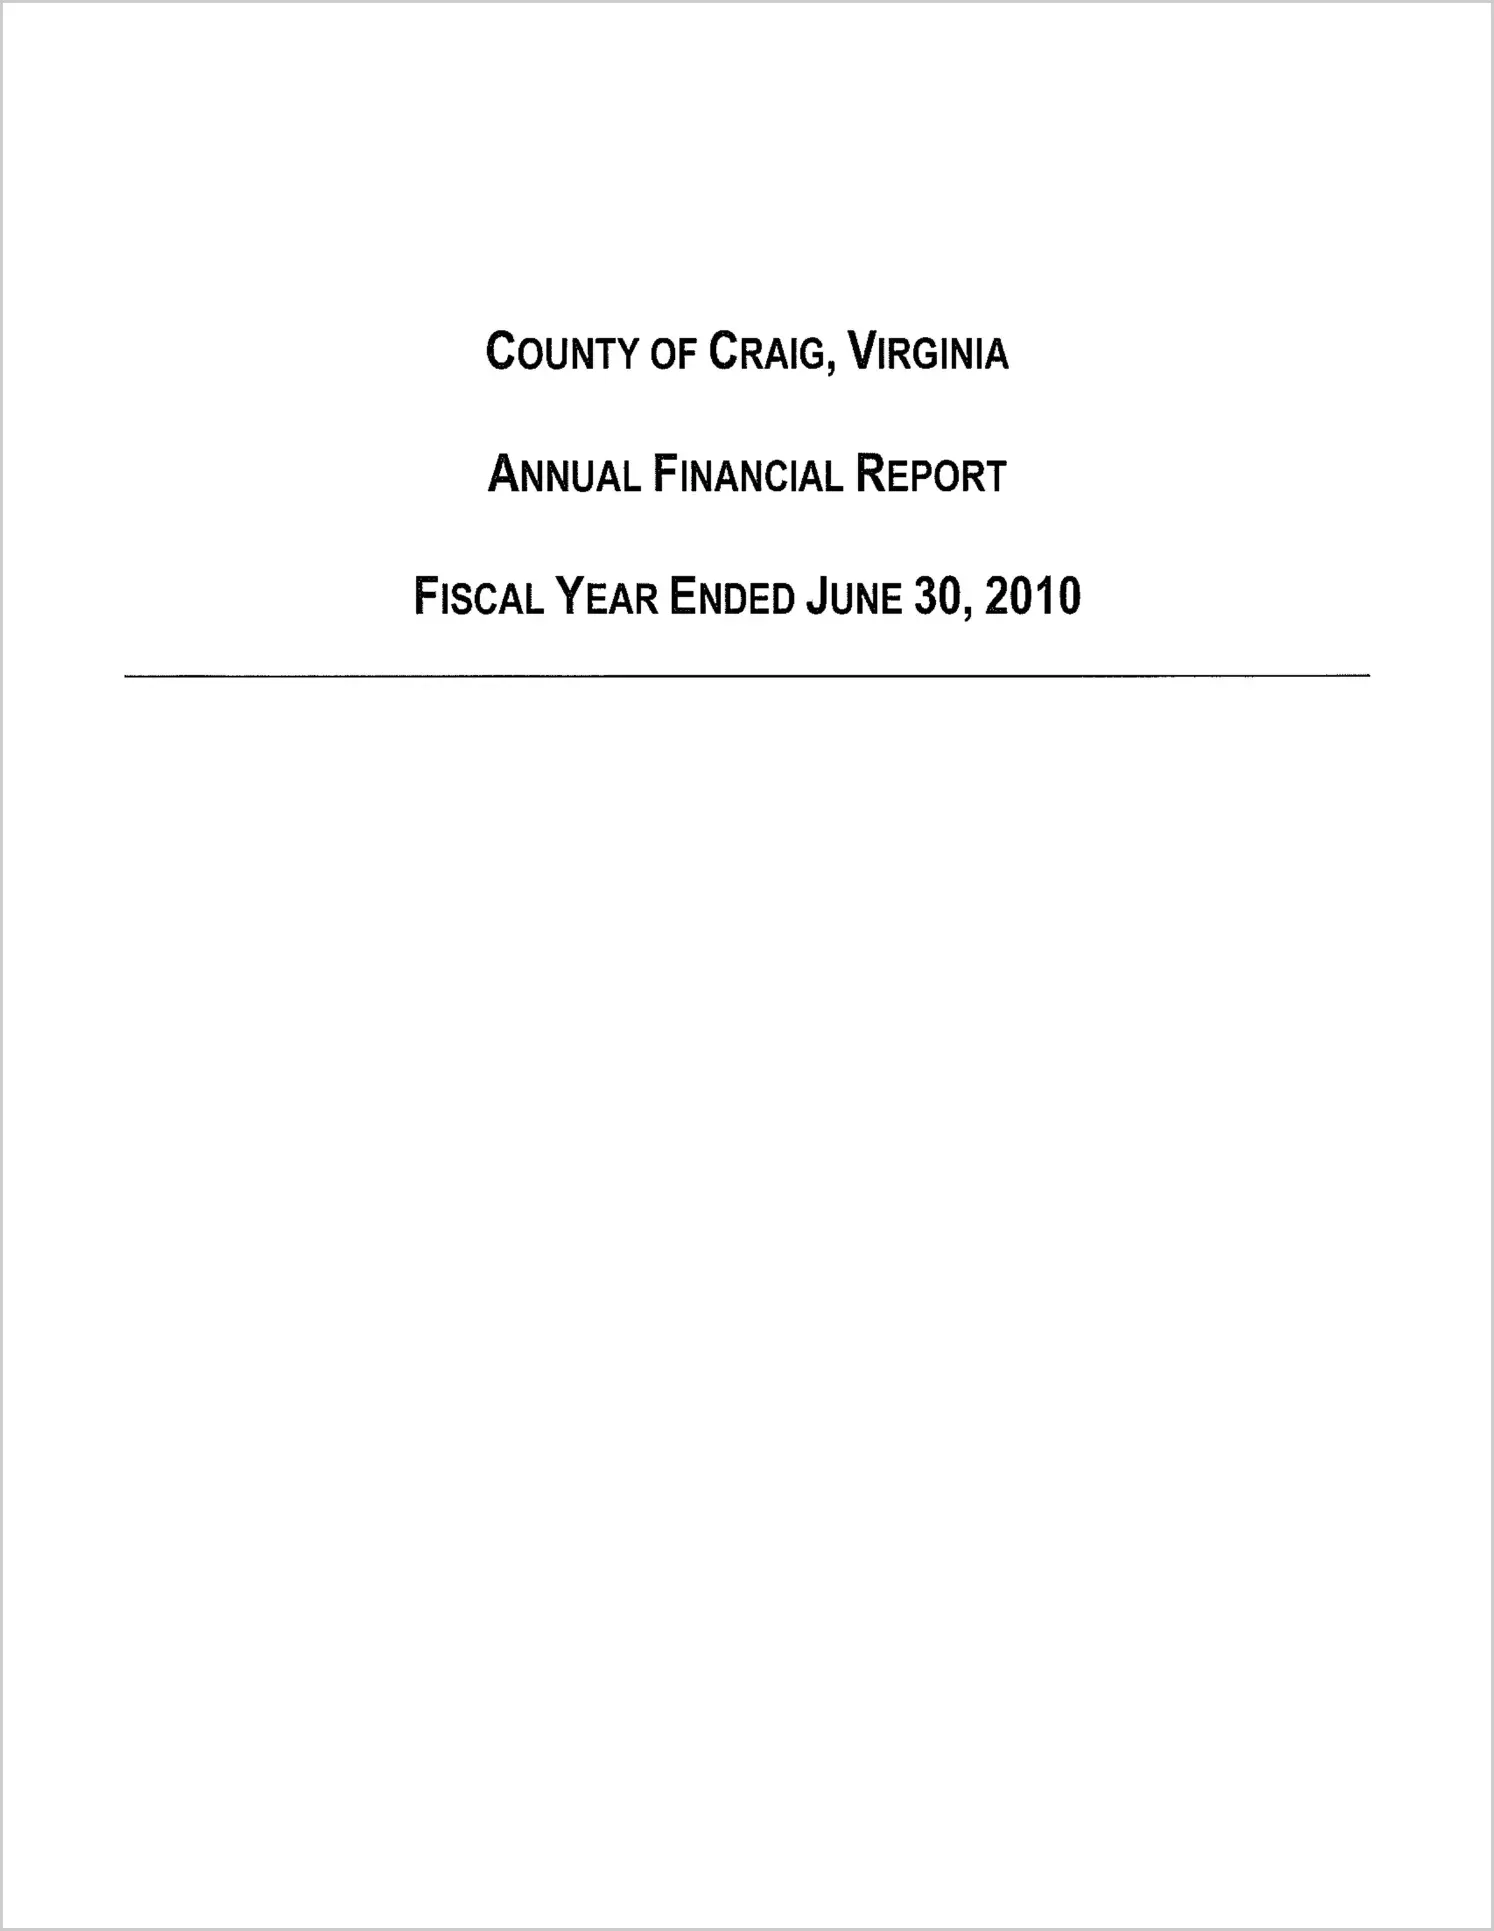 2010 Annual Financial Report for County of Craig